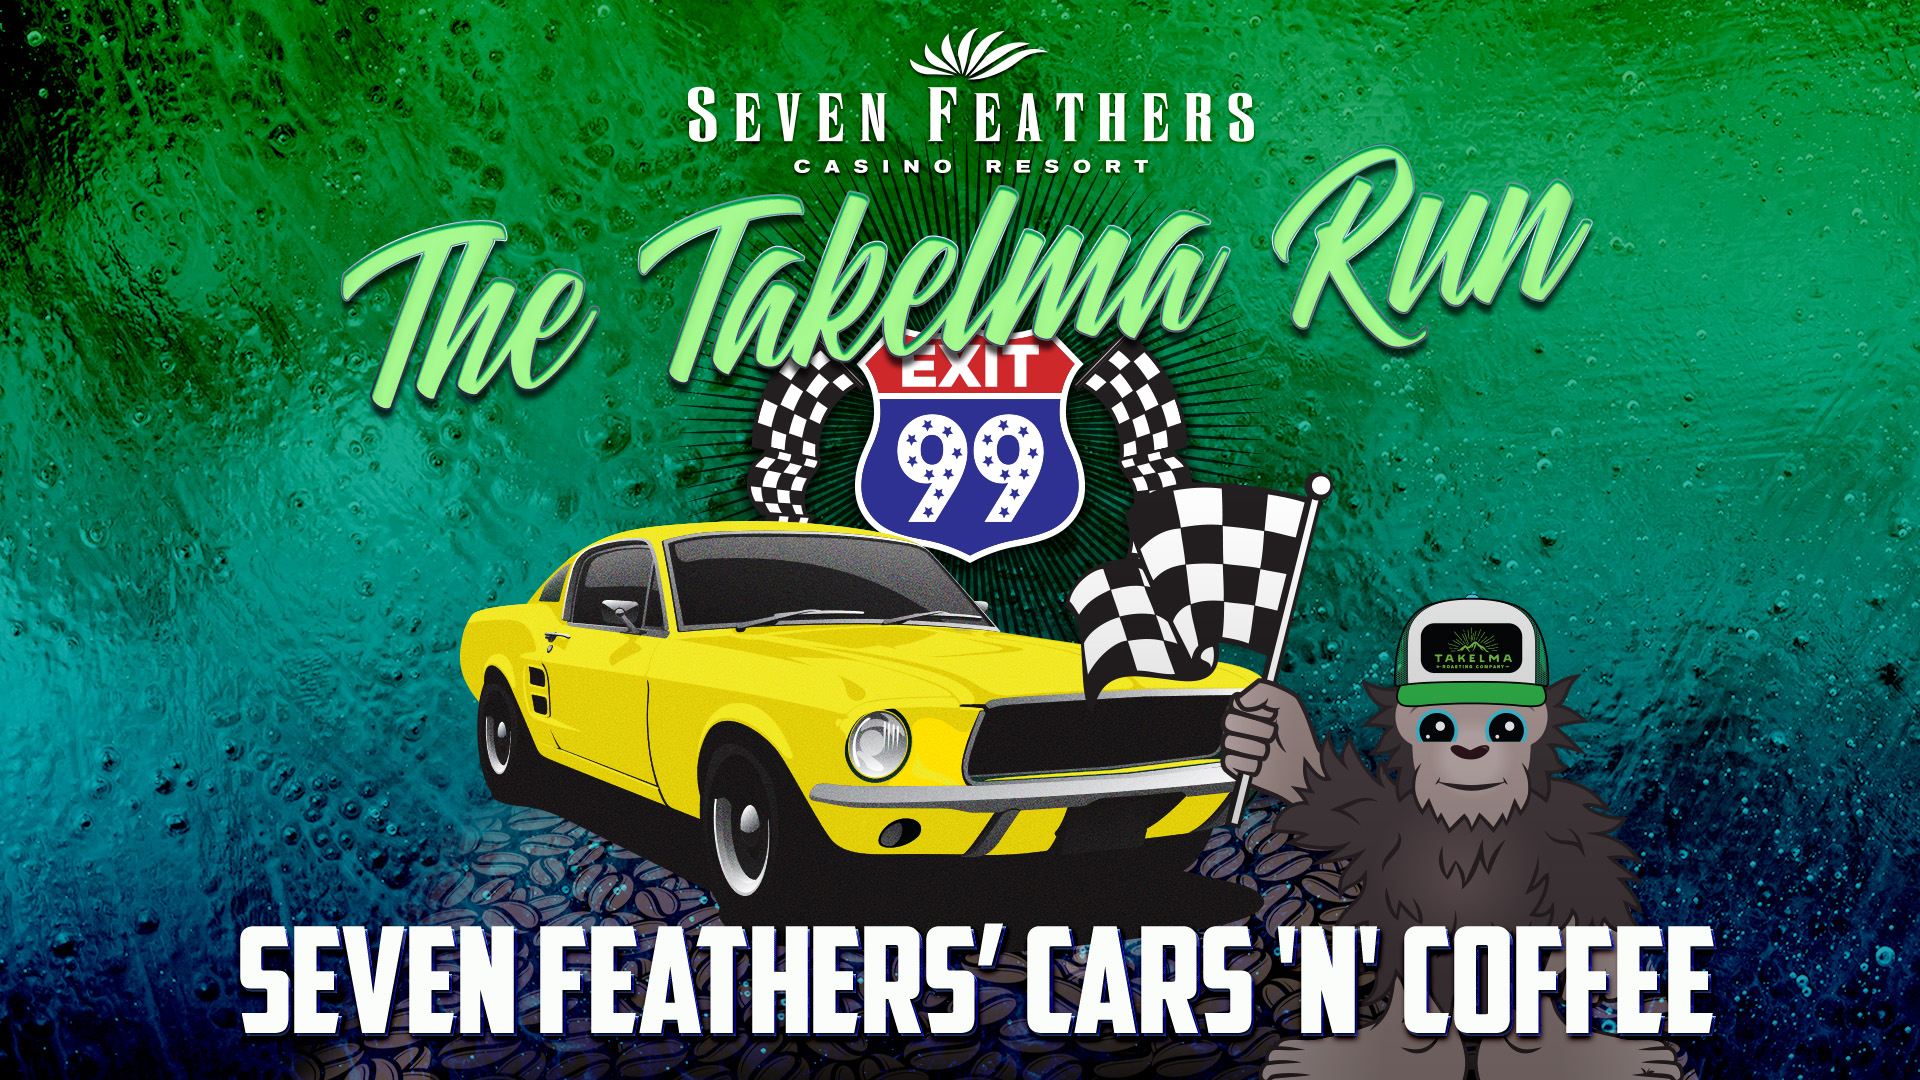 Takelma Run Cars N' Coffee Returns To Seven Feathers Casino Resort This July